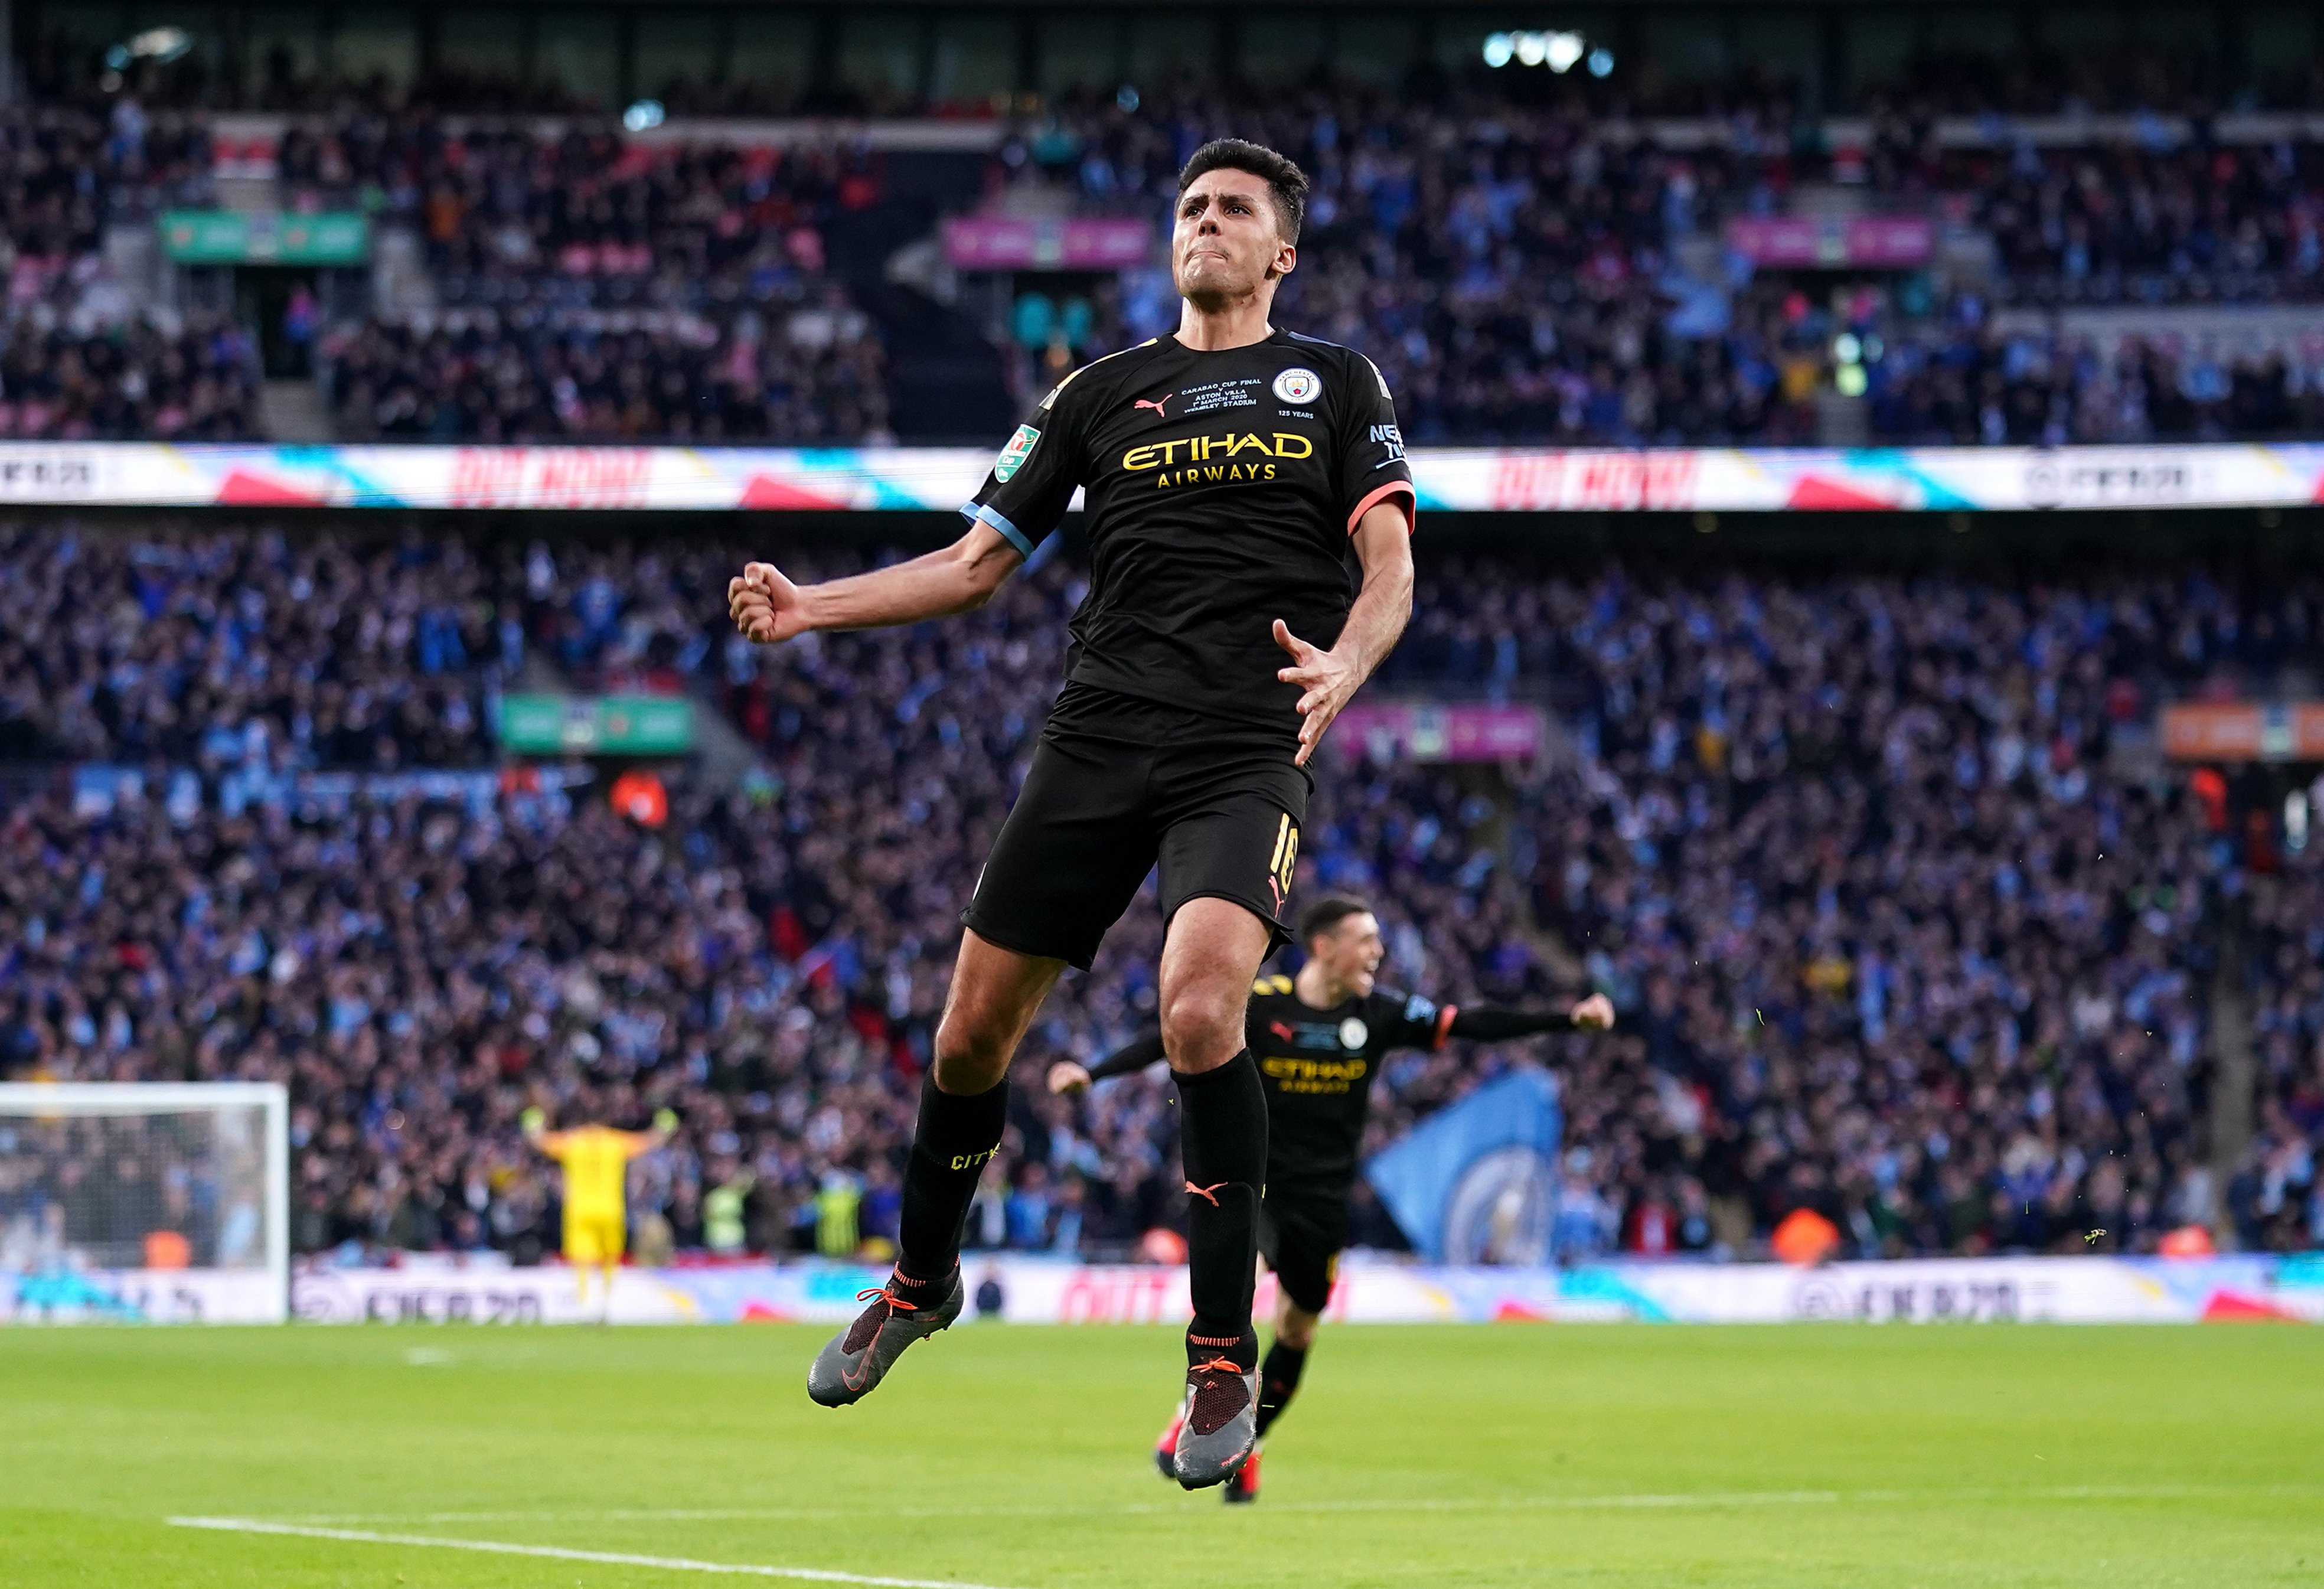 We have a better team than Real Madrid but need to demonstrate it, proclaims Rodri